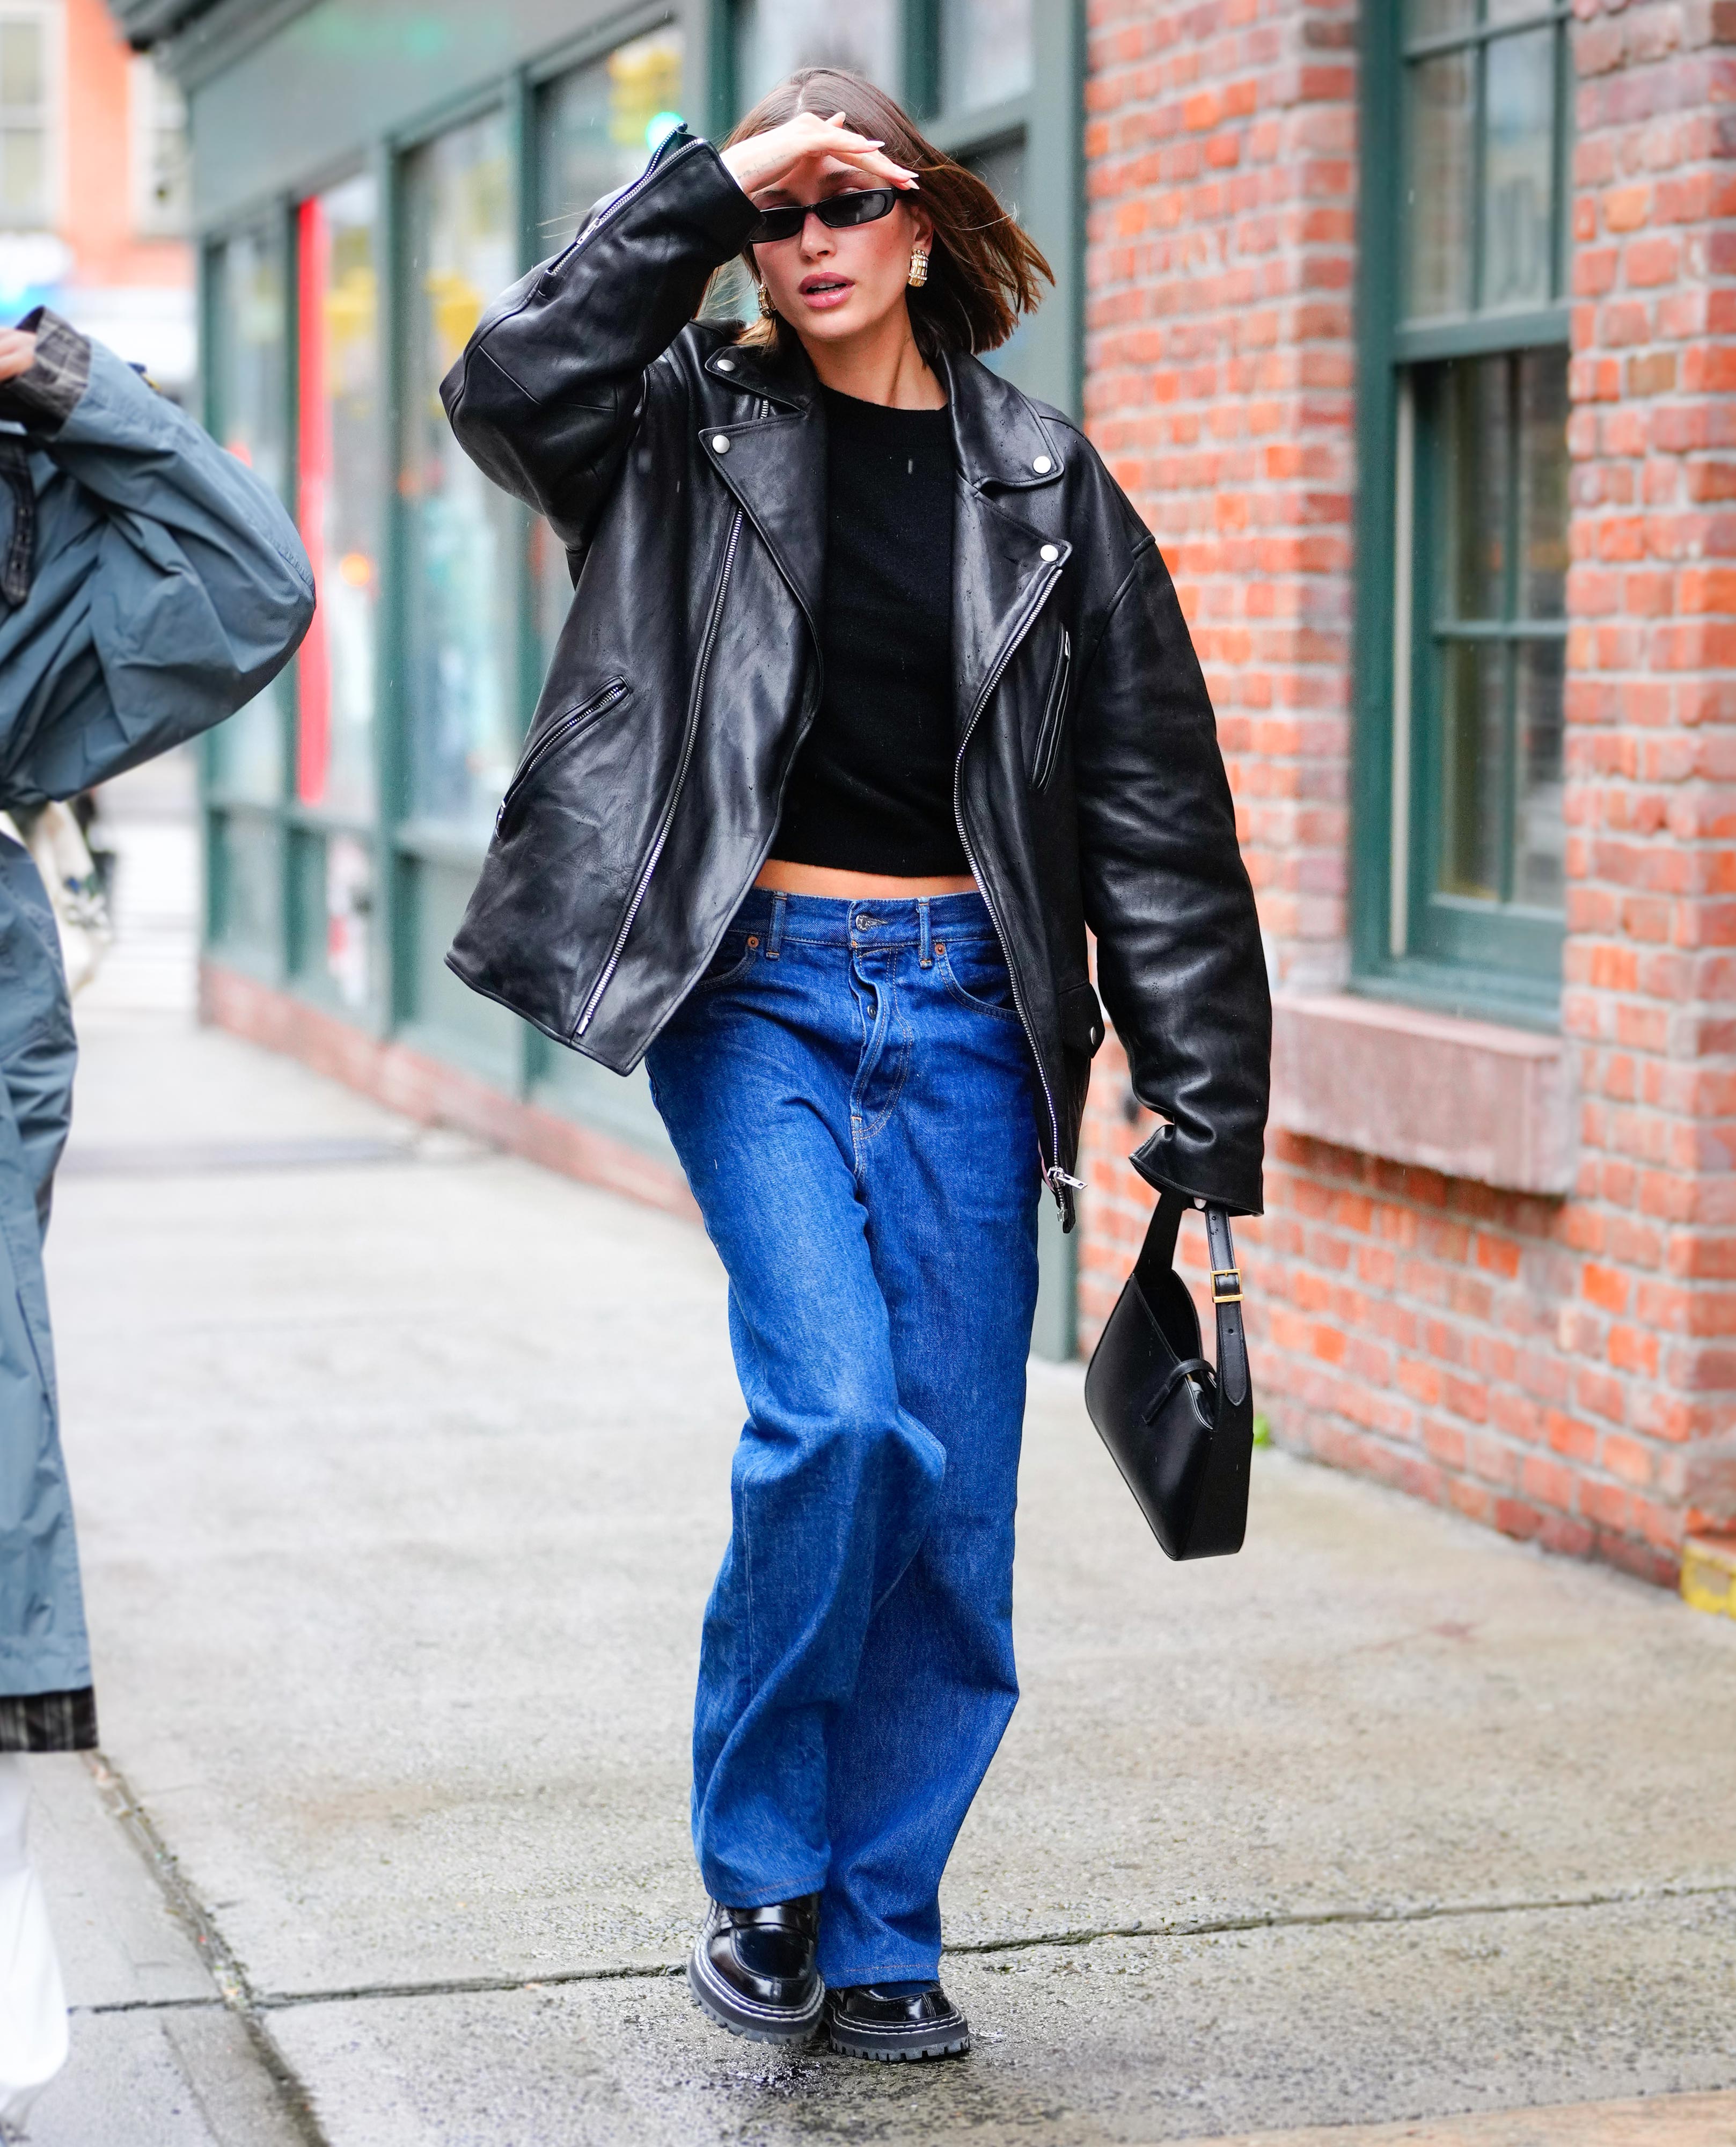 How to Wear Baggy Jeans, According to Celebrities